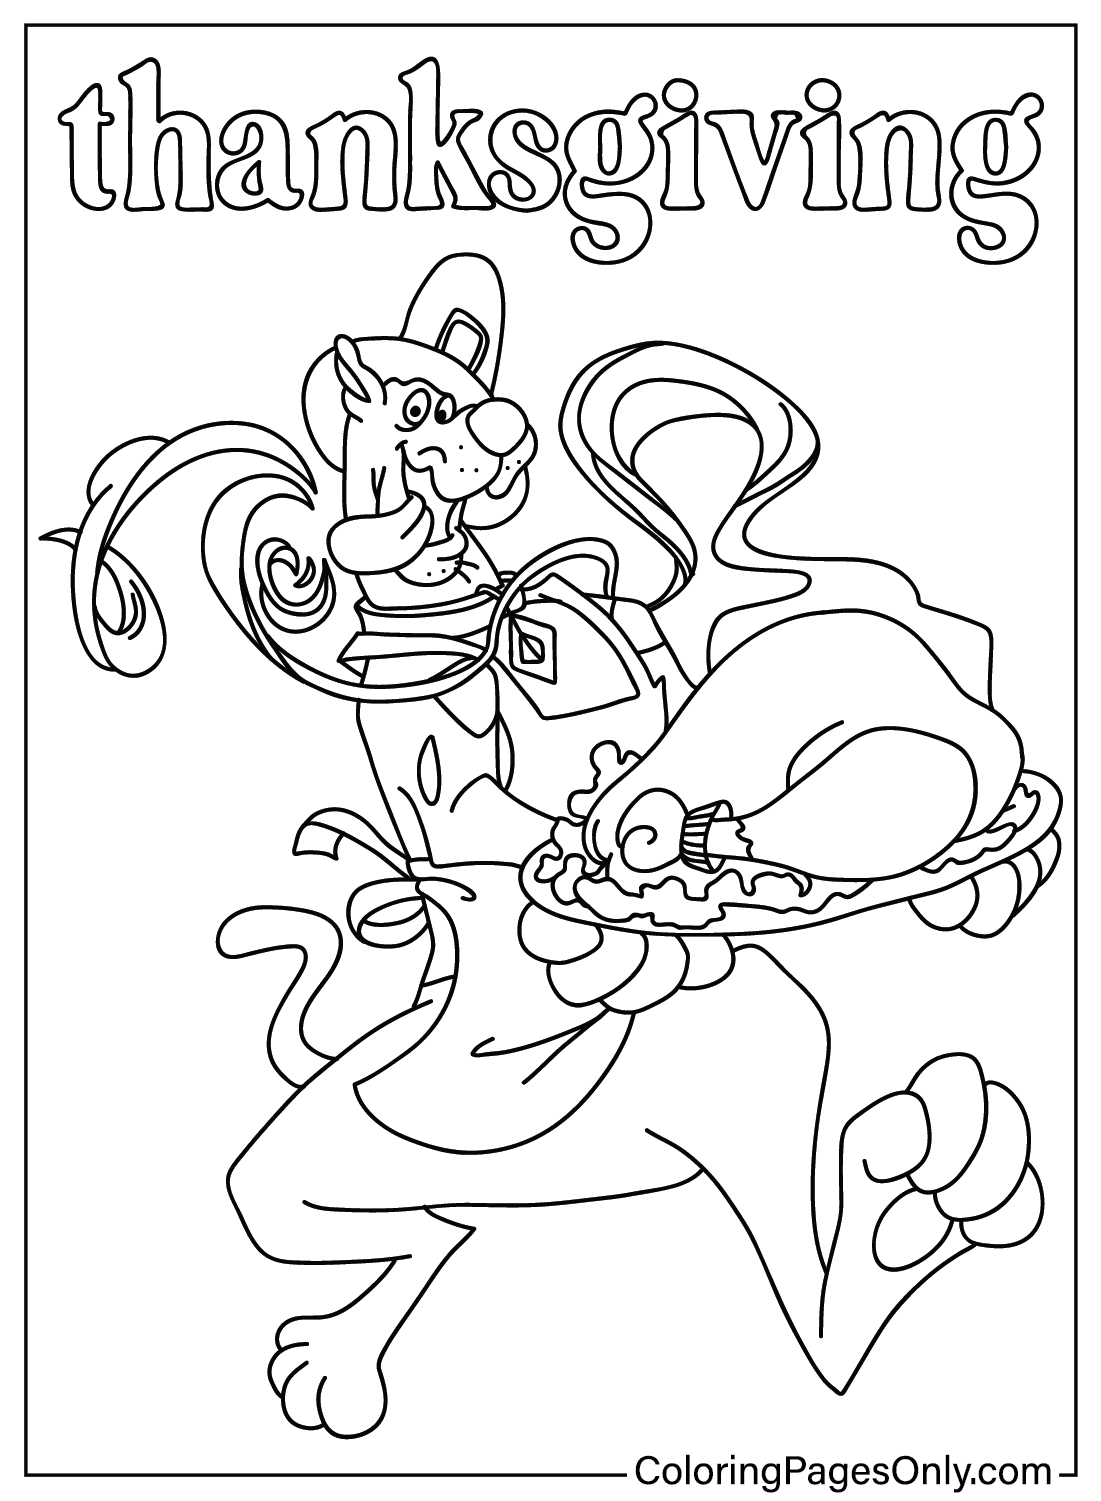 Thanksgiving Scooby-Doo Coloring Page from Thanksgiving Cartoon